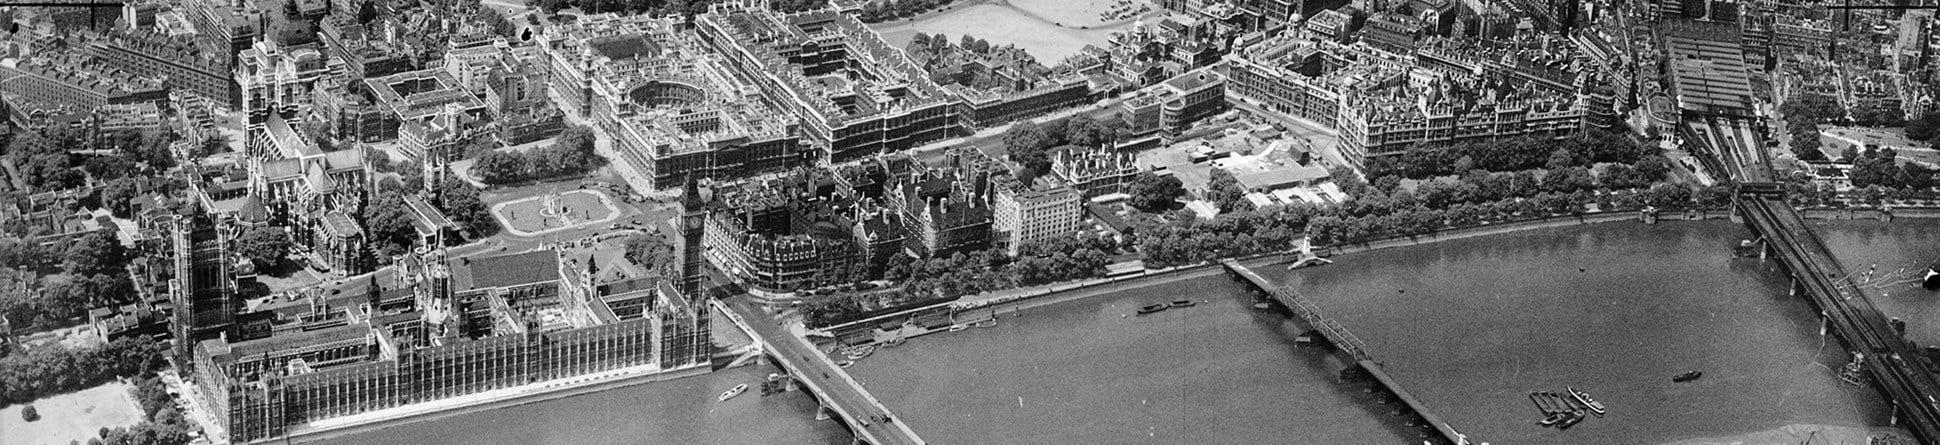 Black and white aerial photo of the Houses of Parliament and River Thames in London.